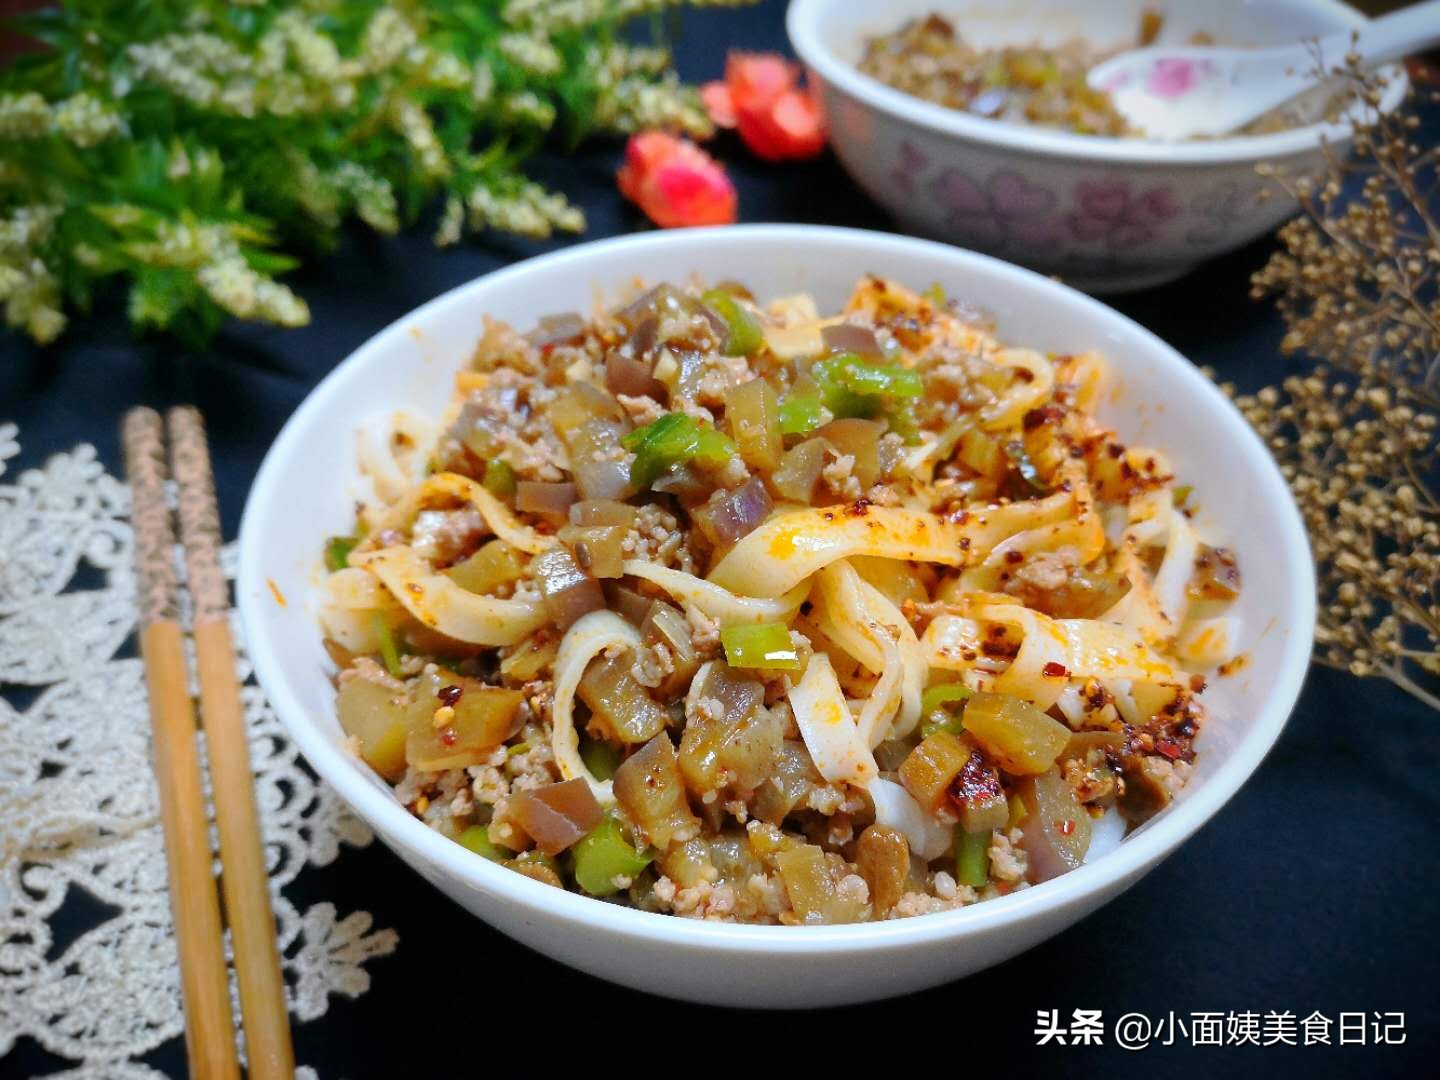 Old hot days, the greediest this bowl of face, sauce is sweet full-bodied, a week eats 5 times to be disrelished little, sweeter than face of fried bean sauce